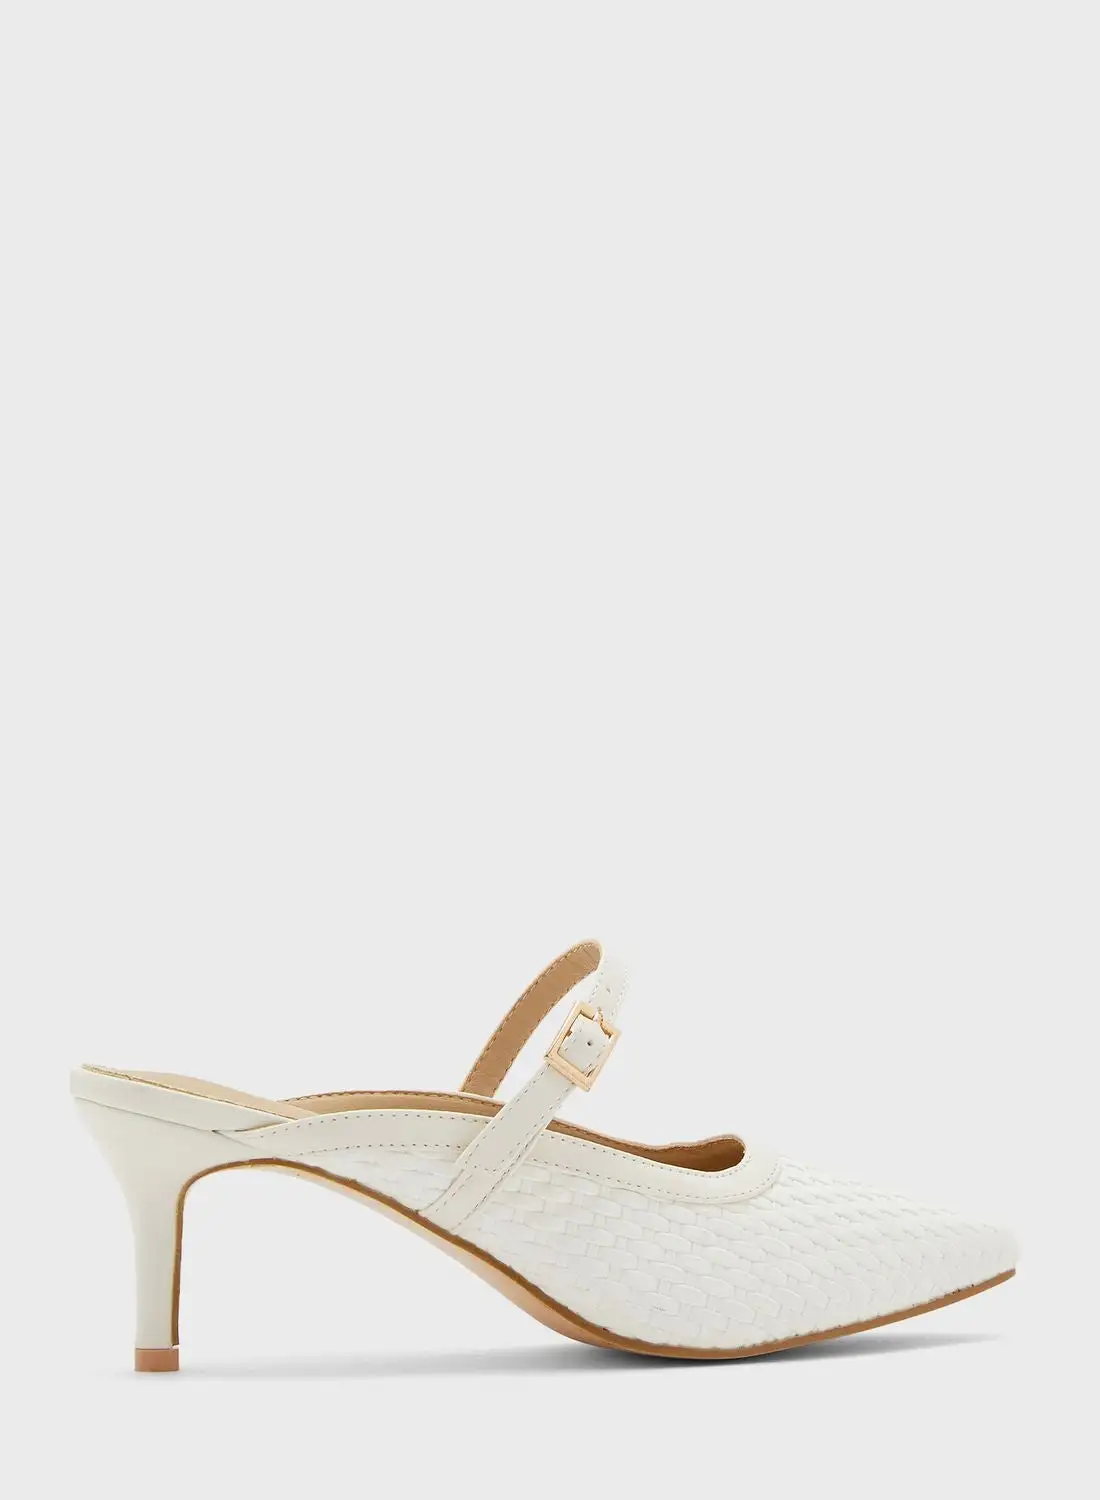 ELLA Structured Pointed Heeled Mule